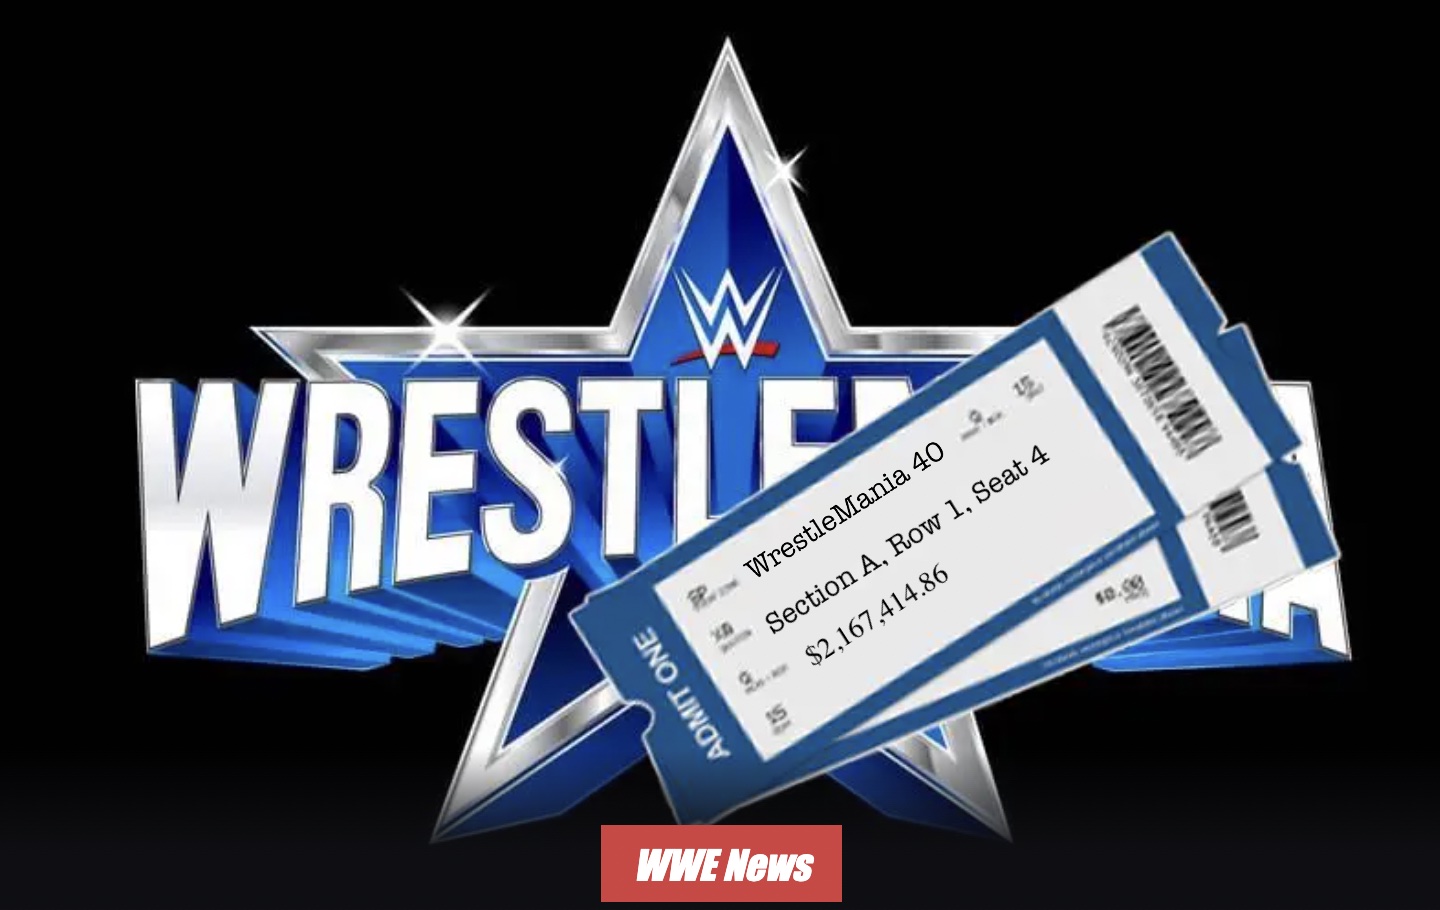 WrestleMania 40: Over 90,000 Tickets Sold in a Single Day